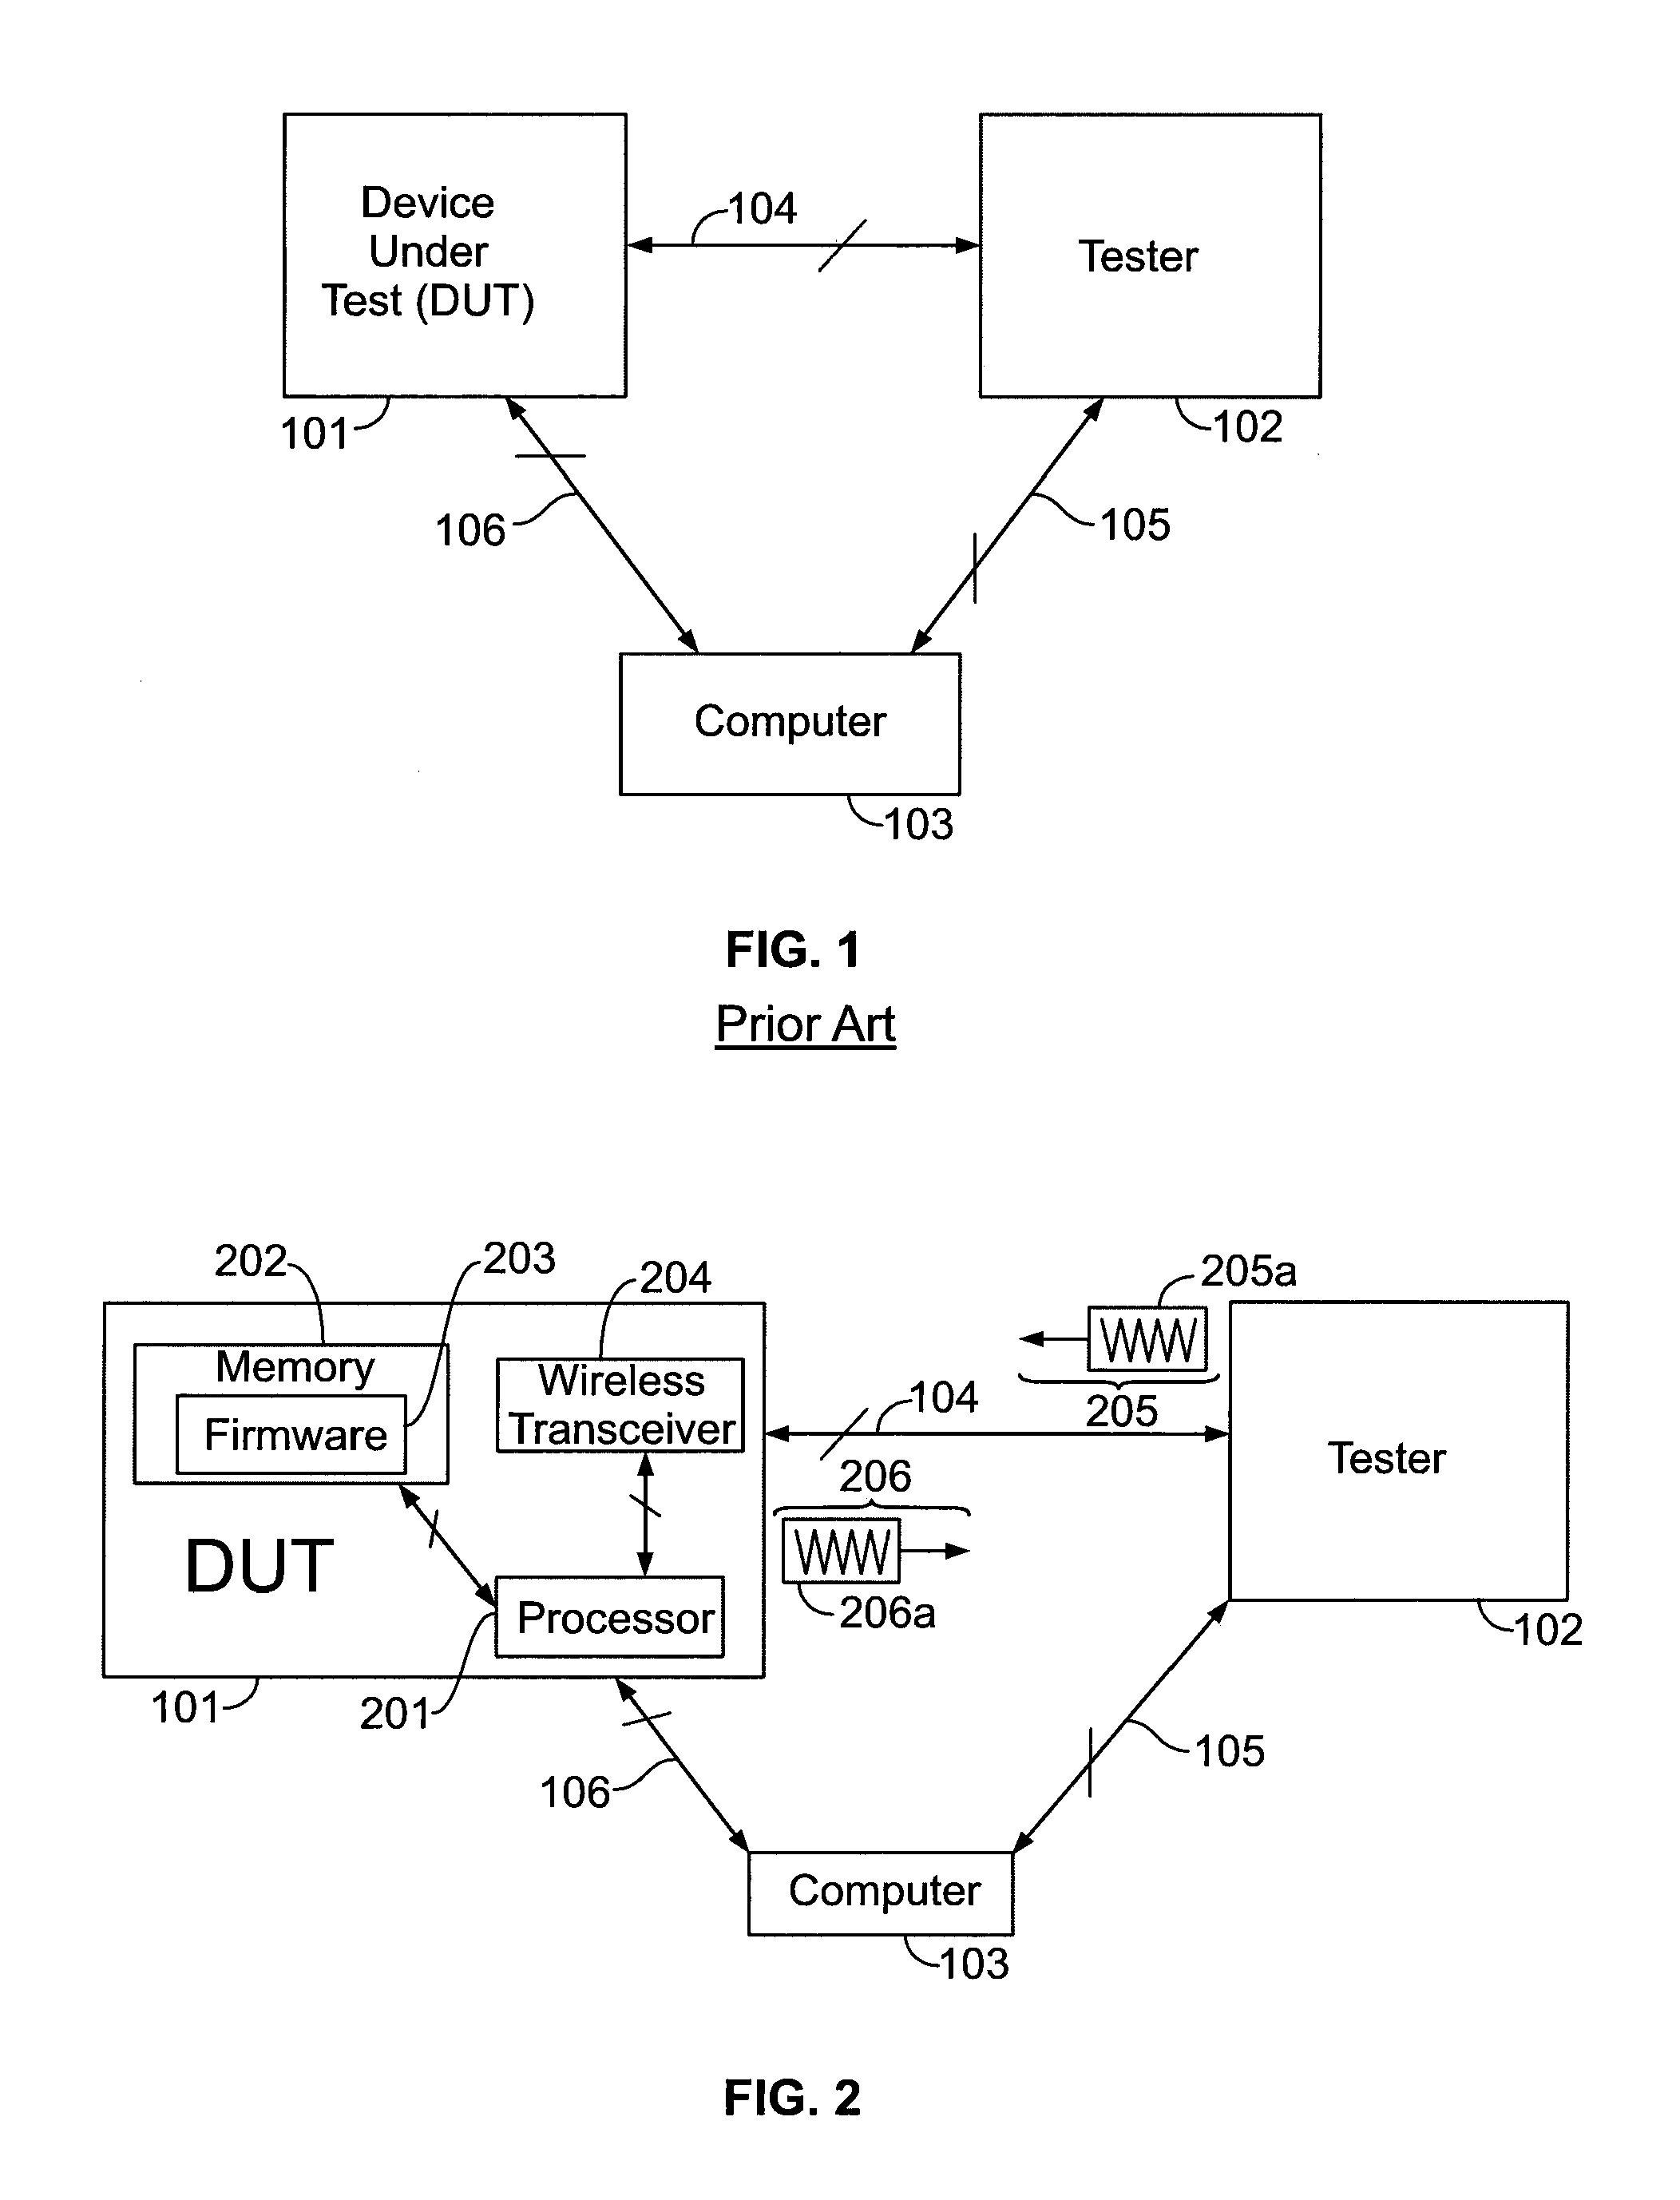 Method for Testing Wireless Devices Using Predefined Test Segments Initiated by Over-The-Air Signal Characteristics